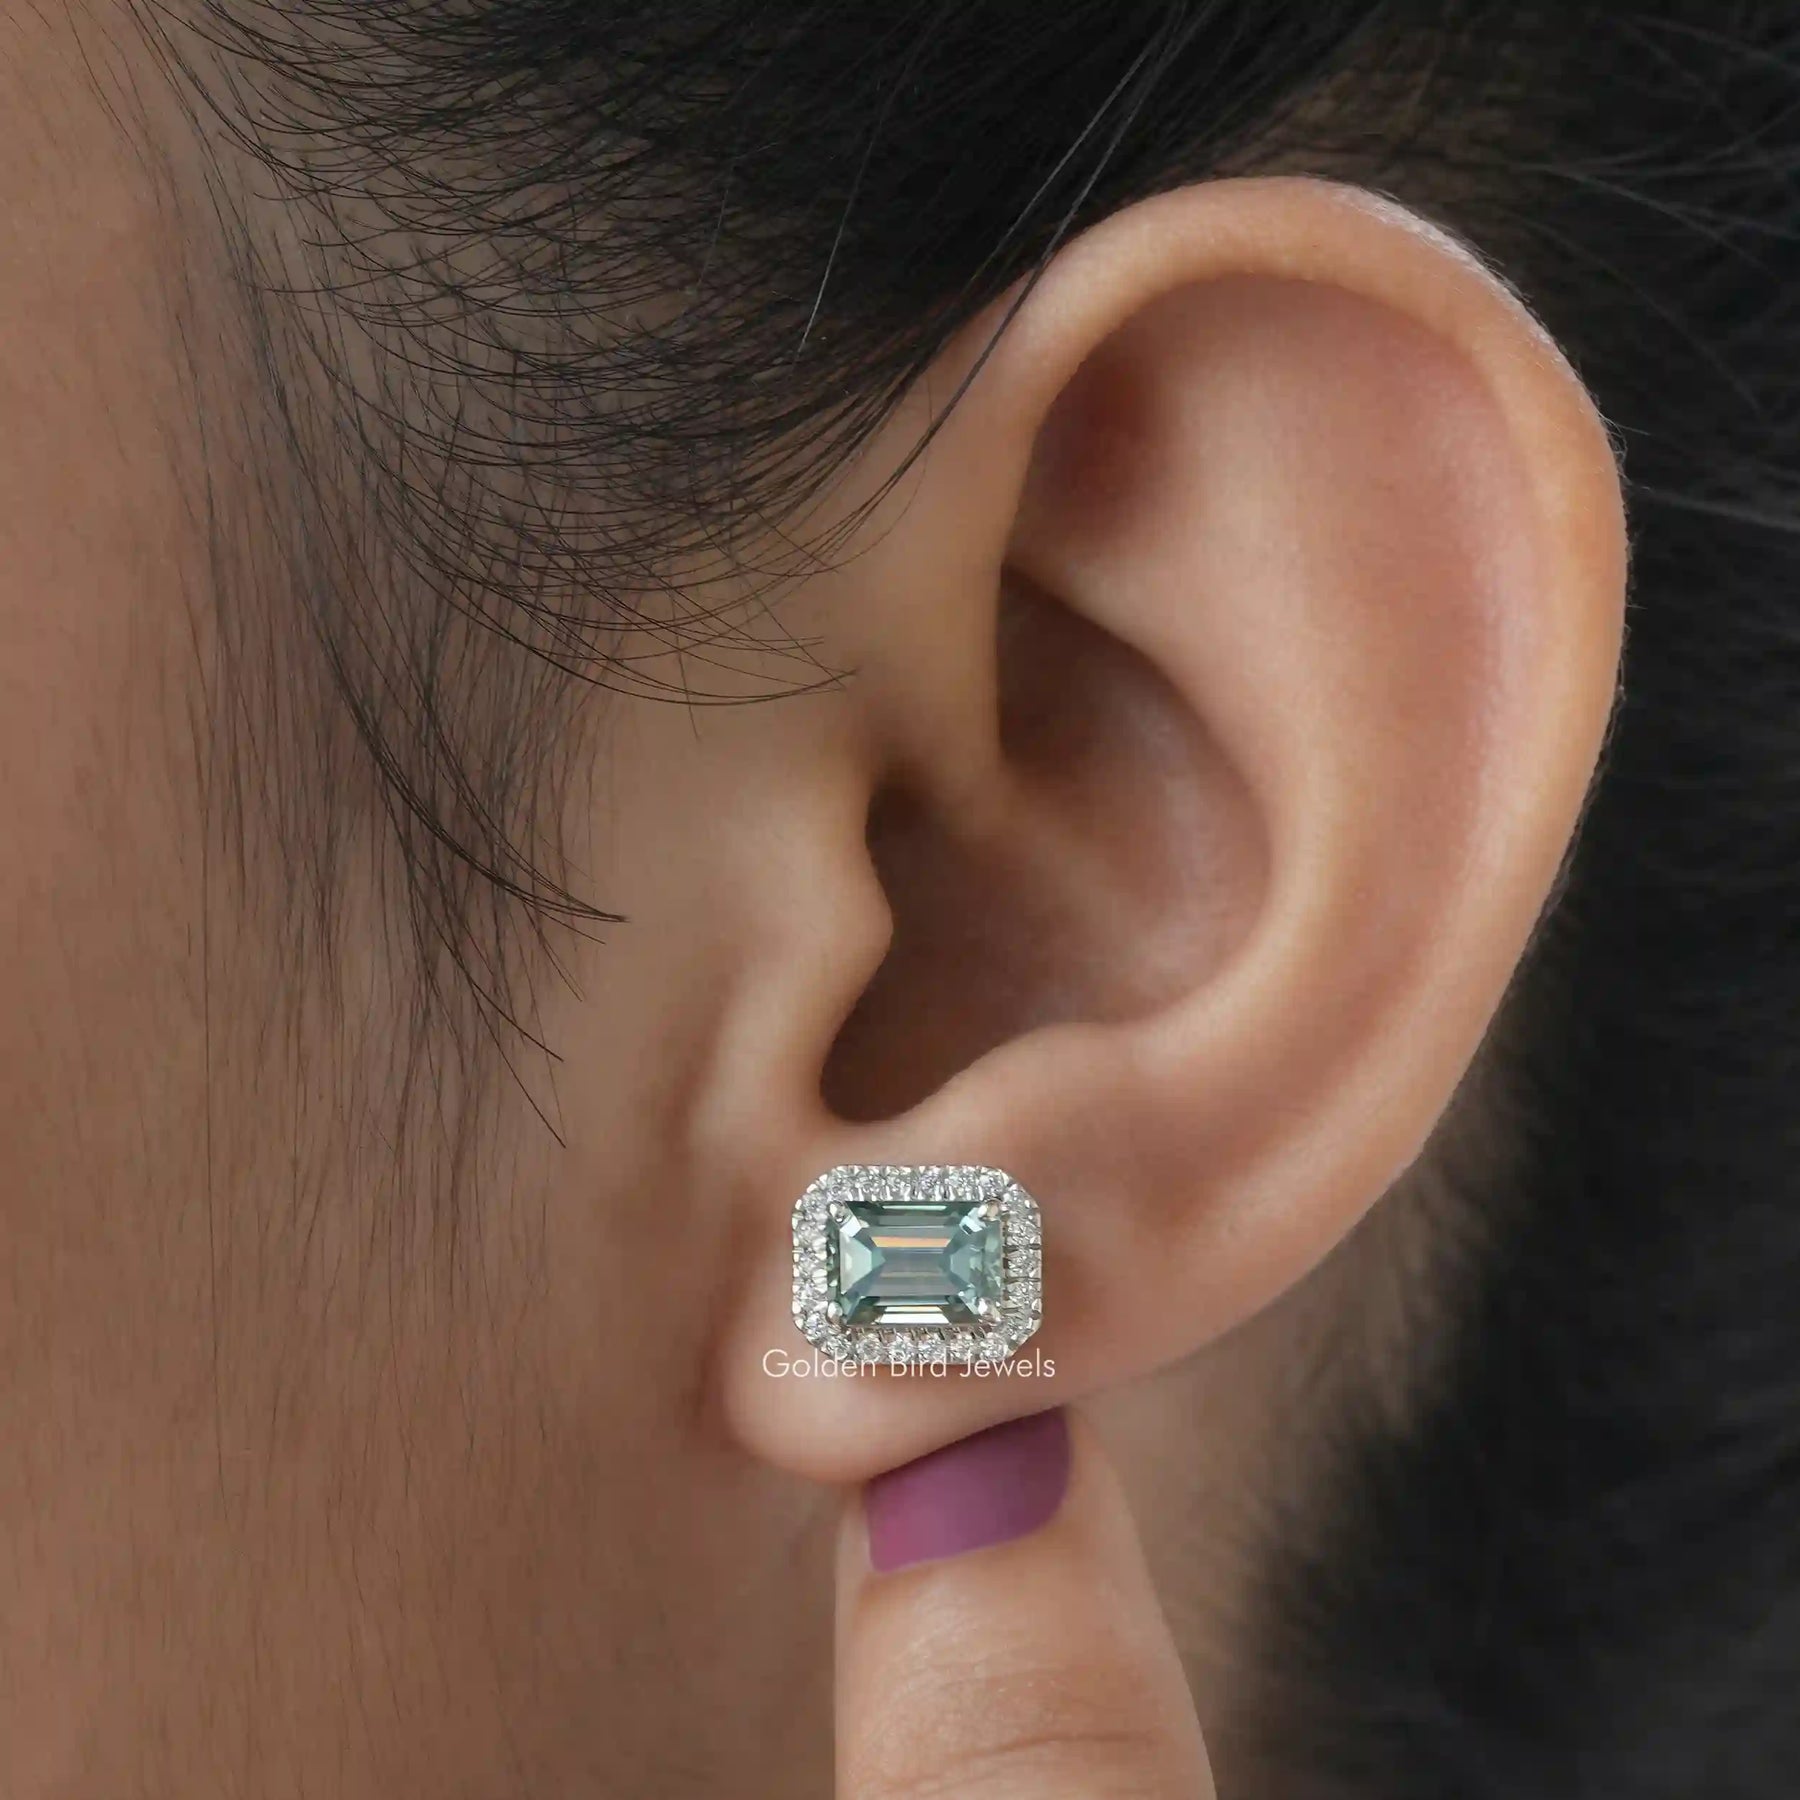 [In ear front view of green emerald cut stud earrings made of white gold]-[Golden Bird Jewels]